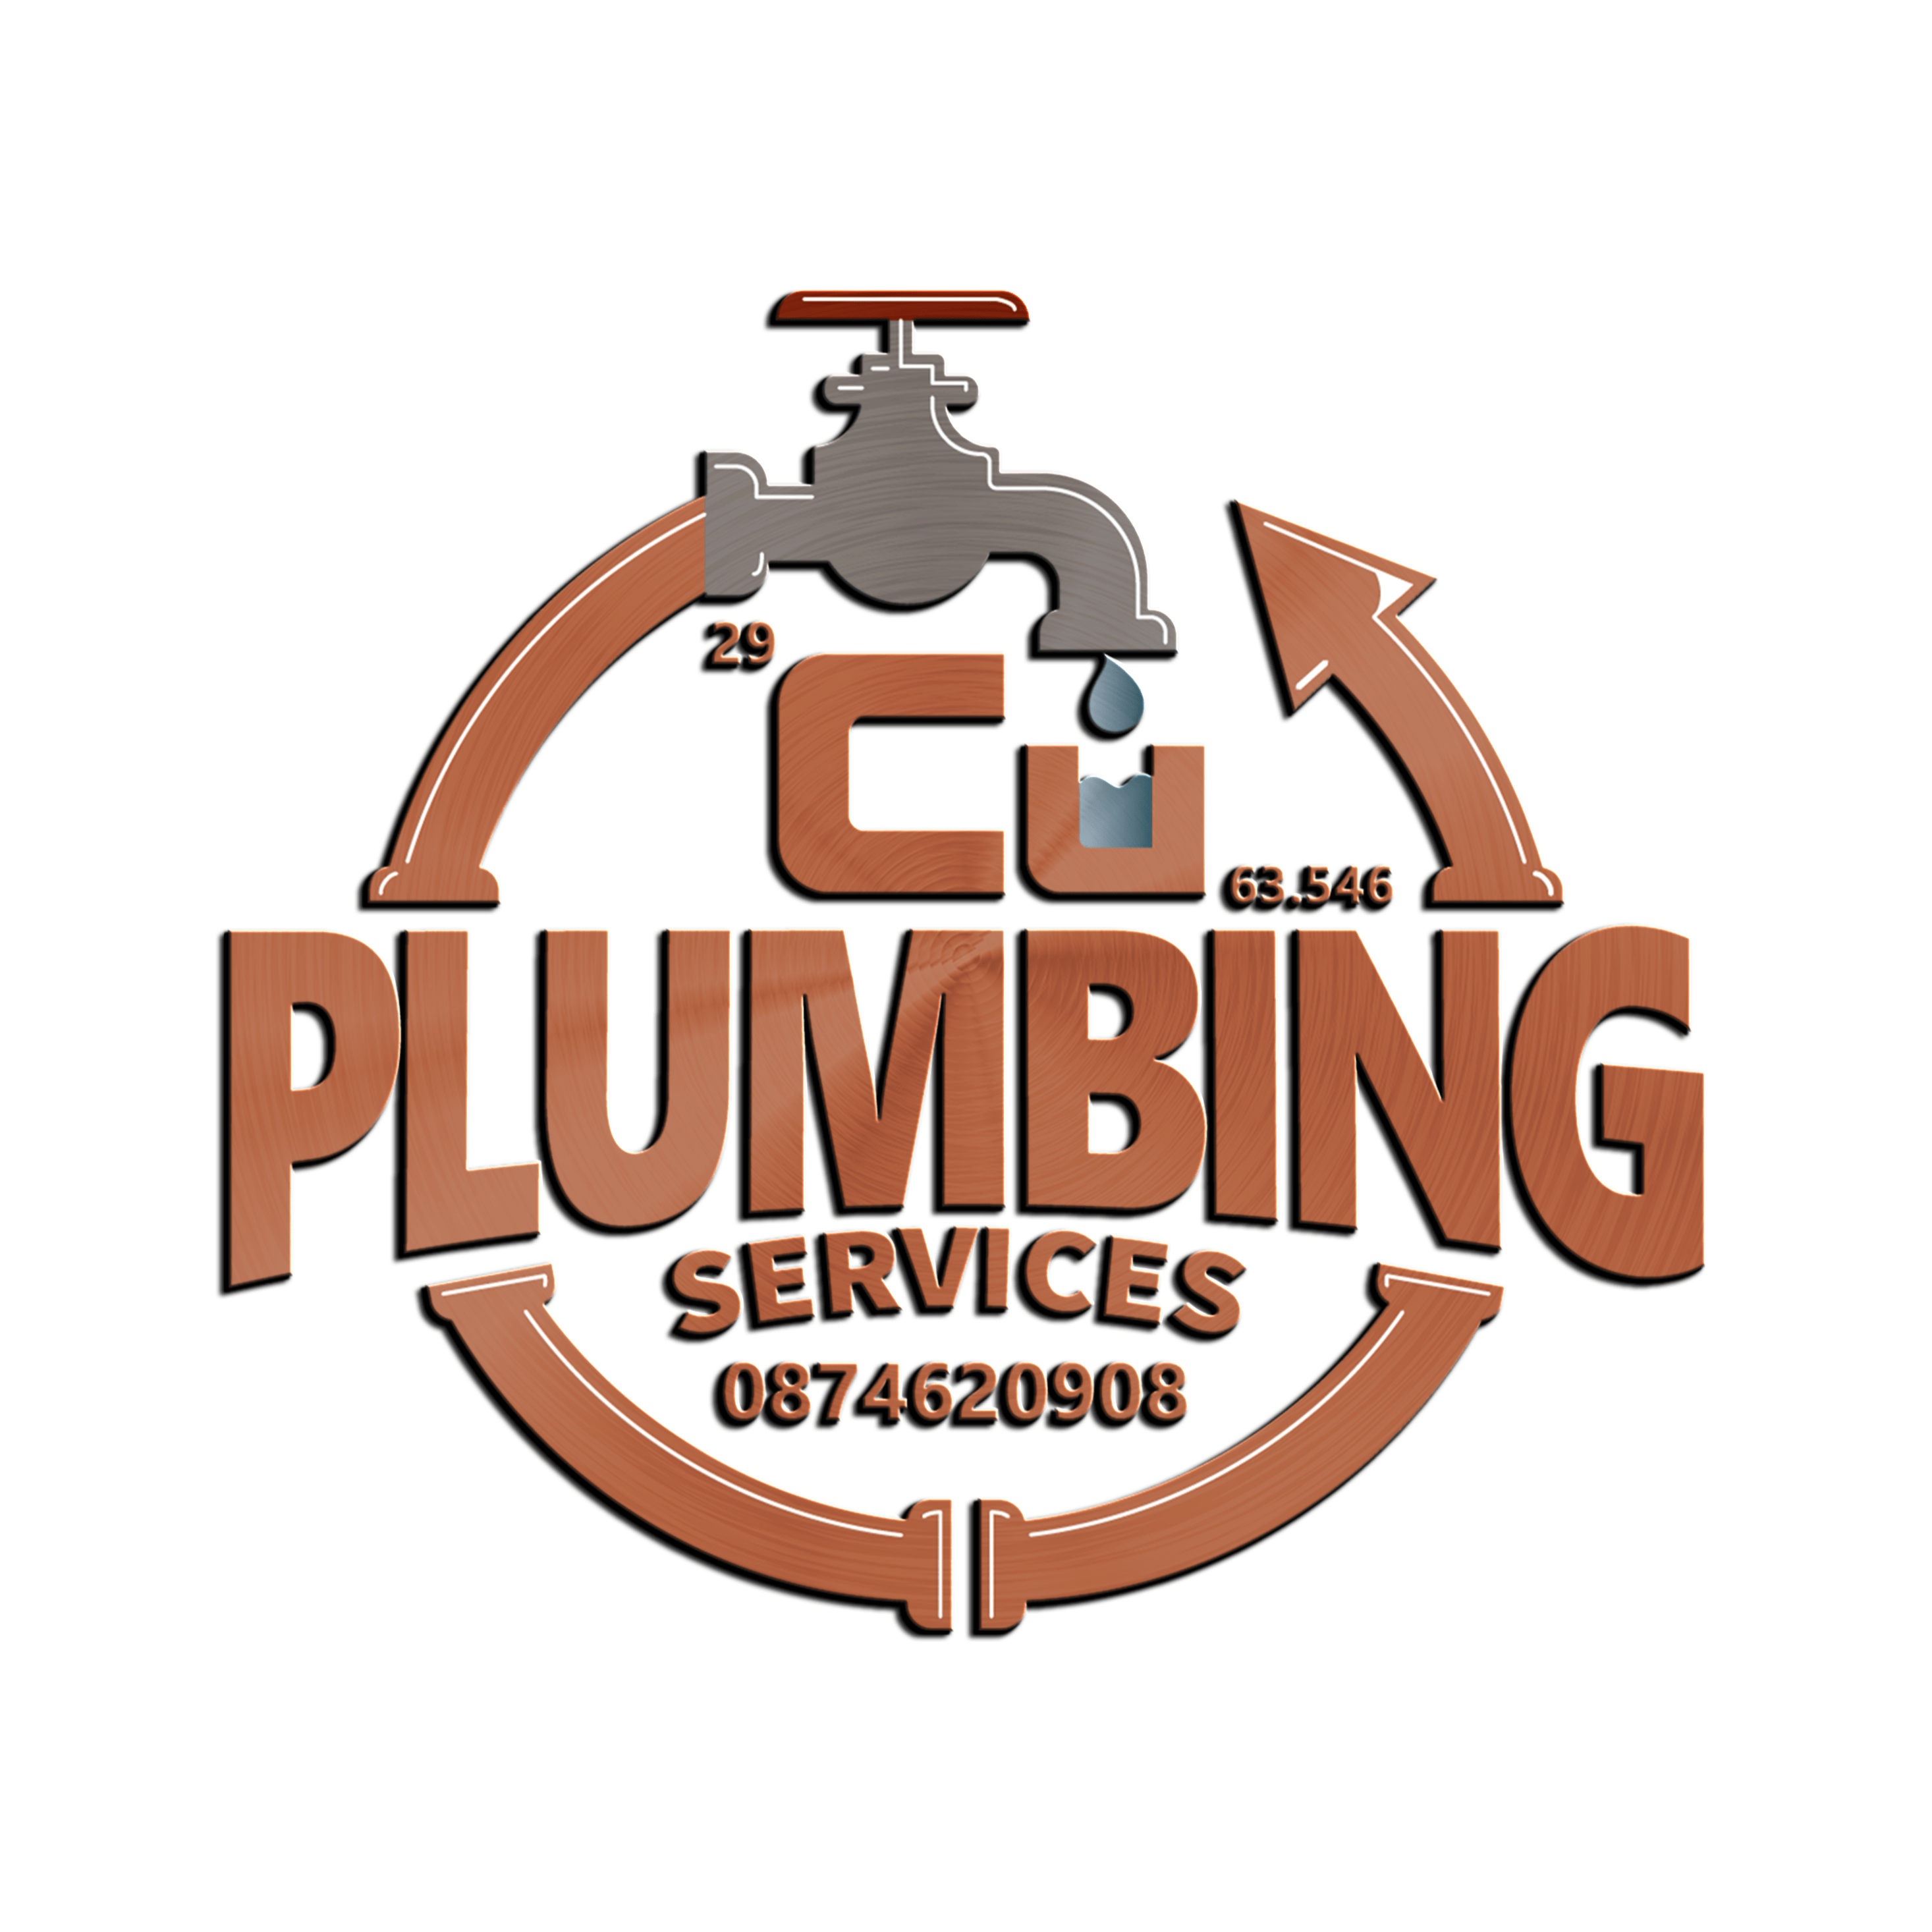 Top Plumber Services in Coolock